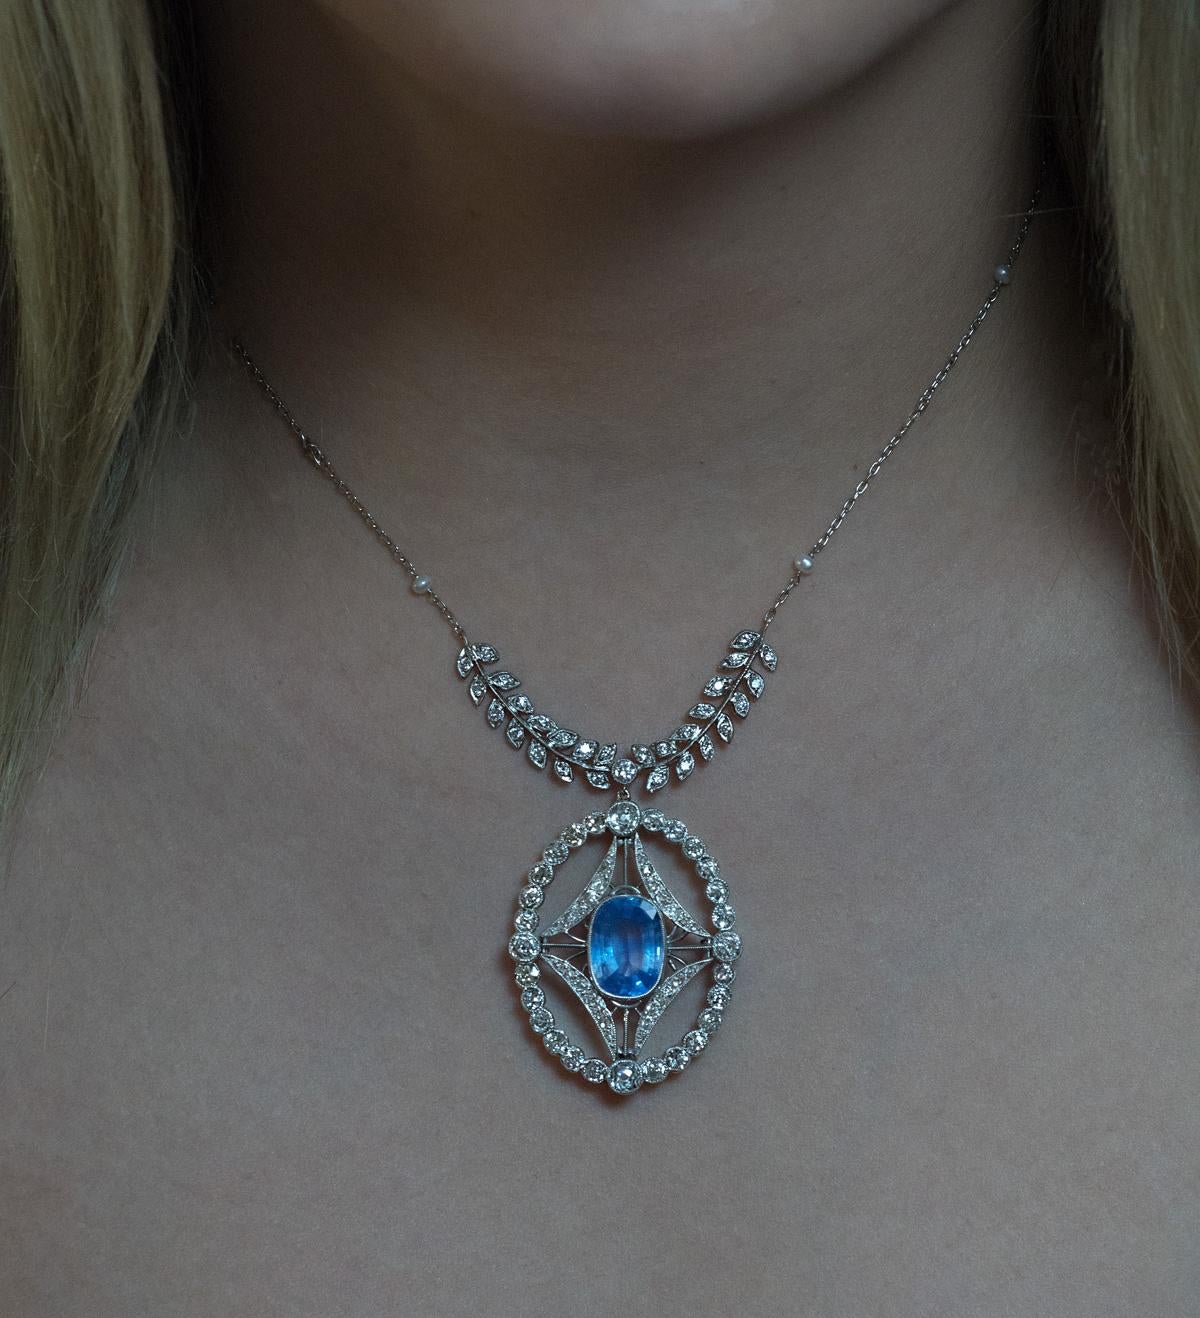 This platinum necklace consists of an oval openwork pendant, a chain with pearls, and a diamond garland. The pendant is circa 1910. It is handcrafted in platinum topped gold and centered with a sky blue Ceylon sapphire. The sapphire is surrounded by